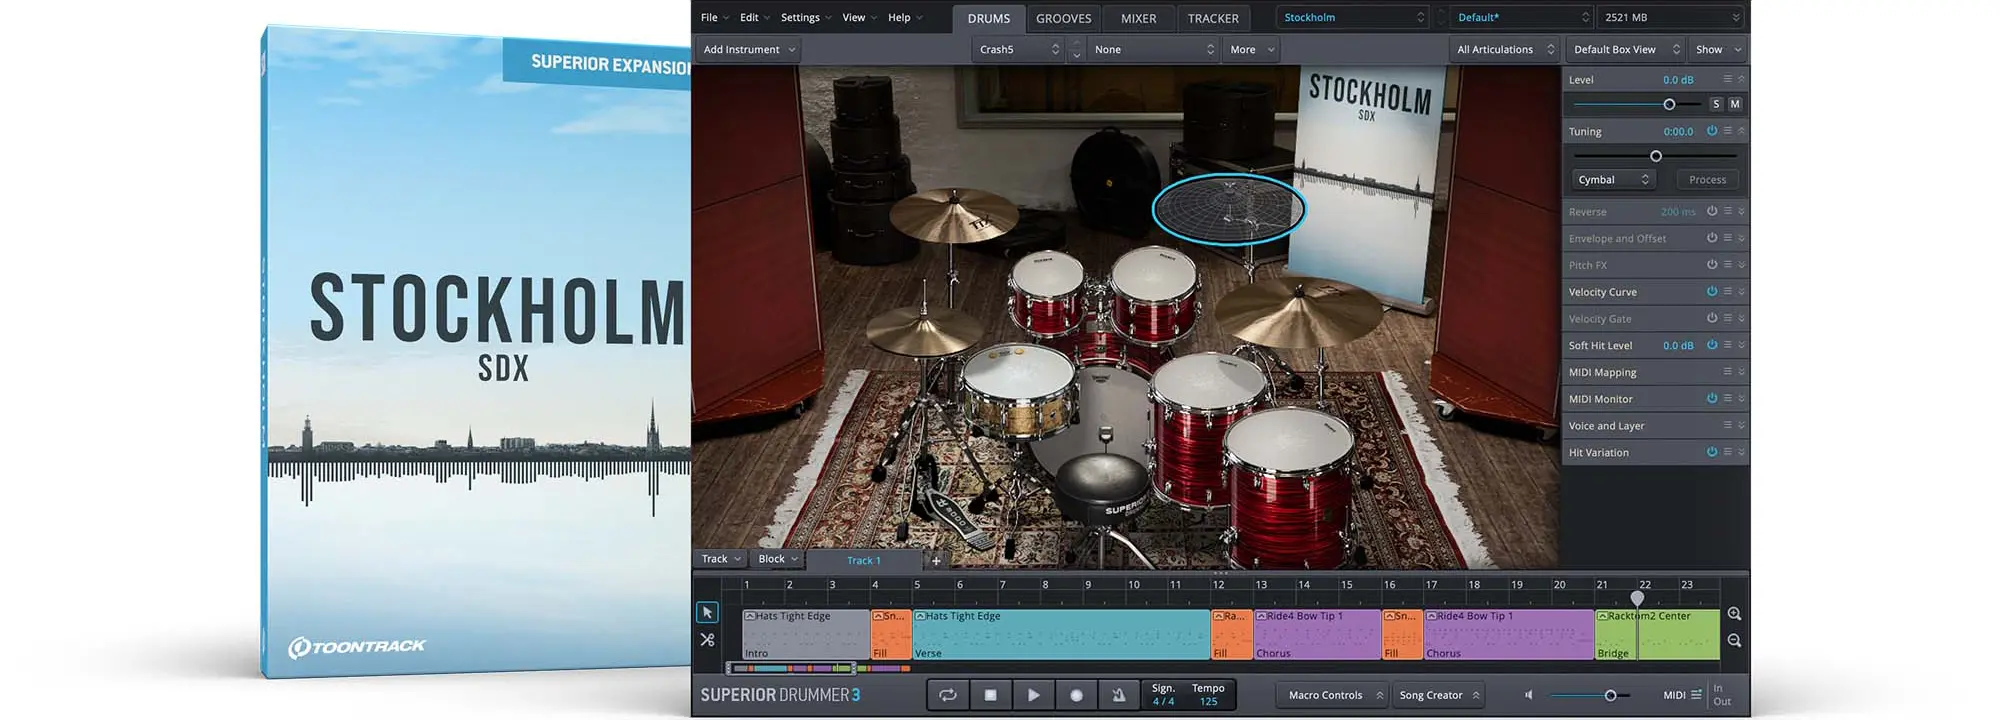 The Stockholm SDX is an expansion for Superior Drummer 3 featuring five kits recorded at the RMV Studio in Stockholm by engineer Linn Fijal and drummer Josephine Forsman